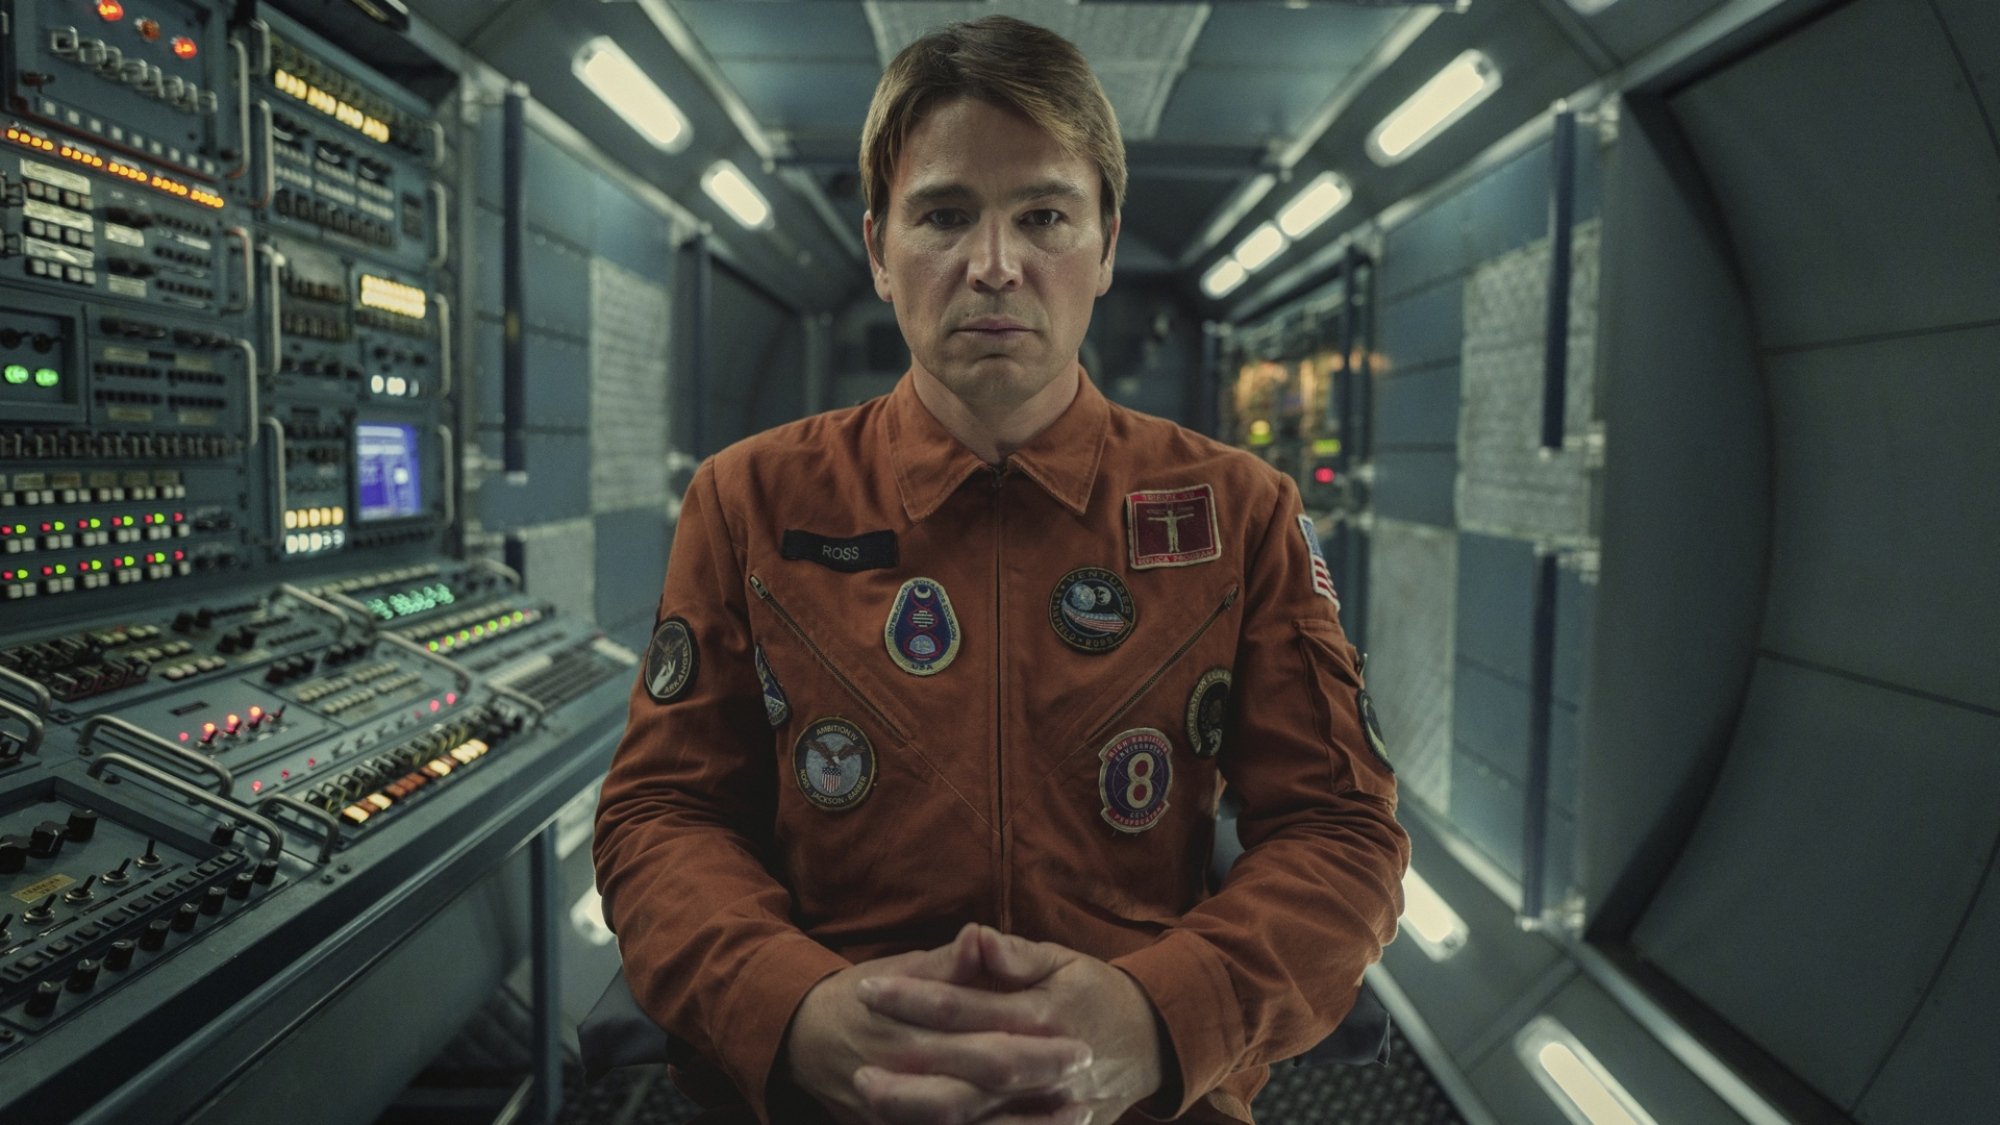 A man in an orange astronaut suit stares at the camera from inside a control room.